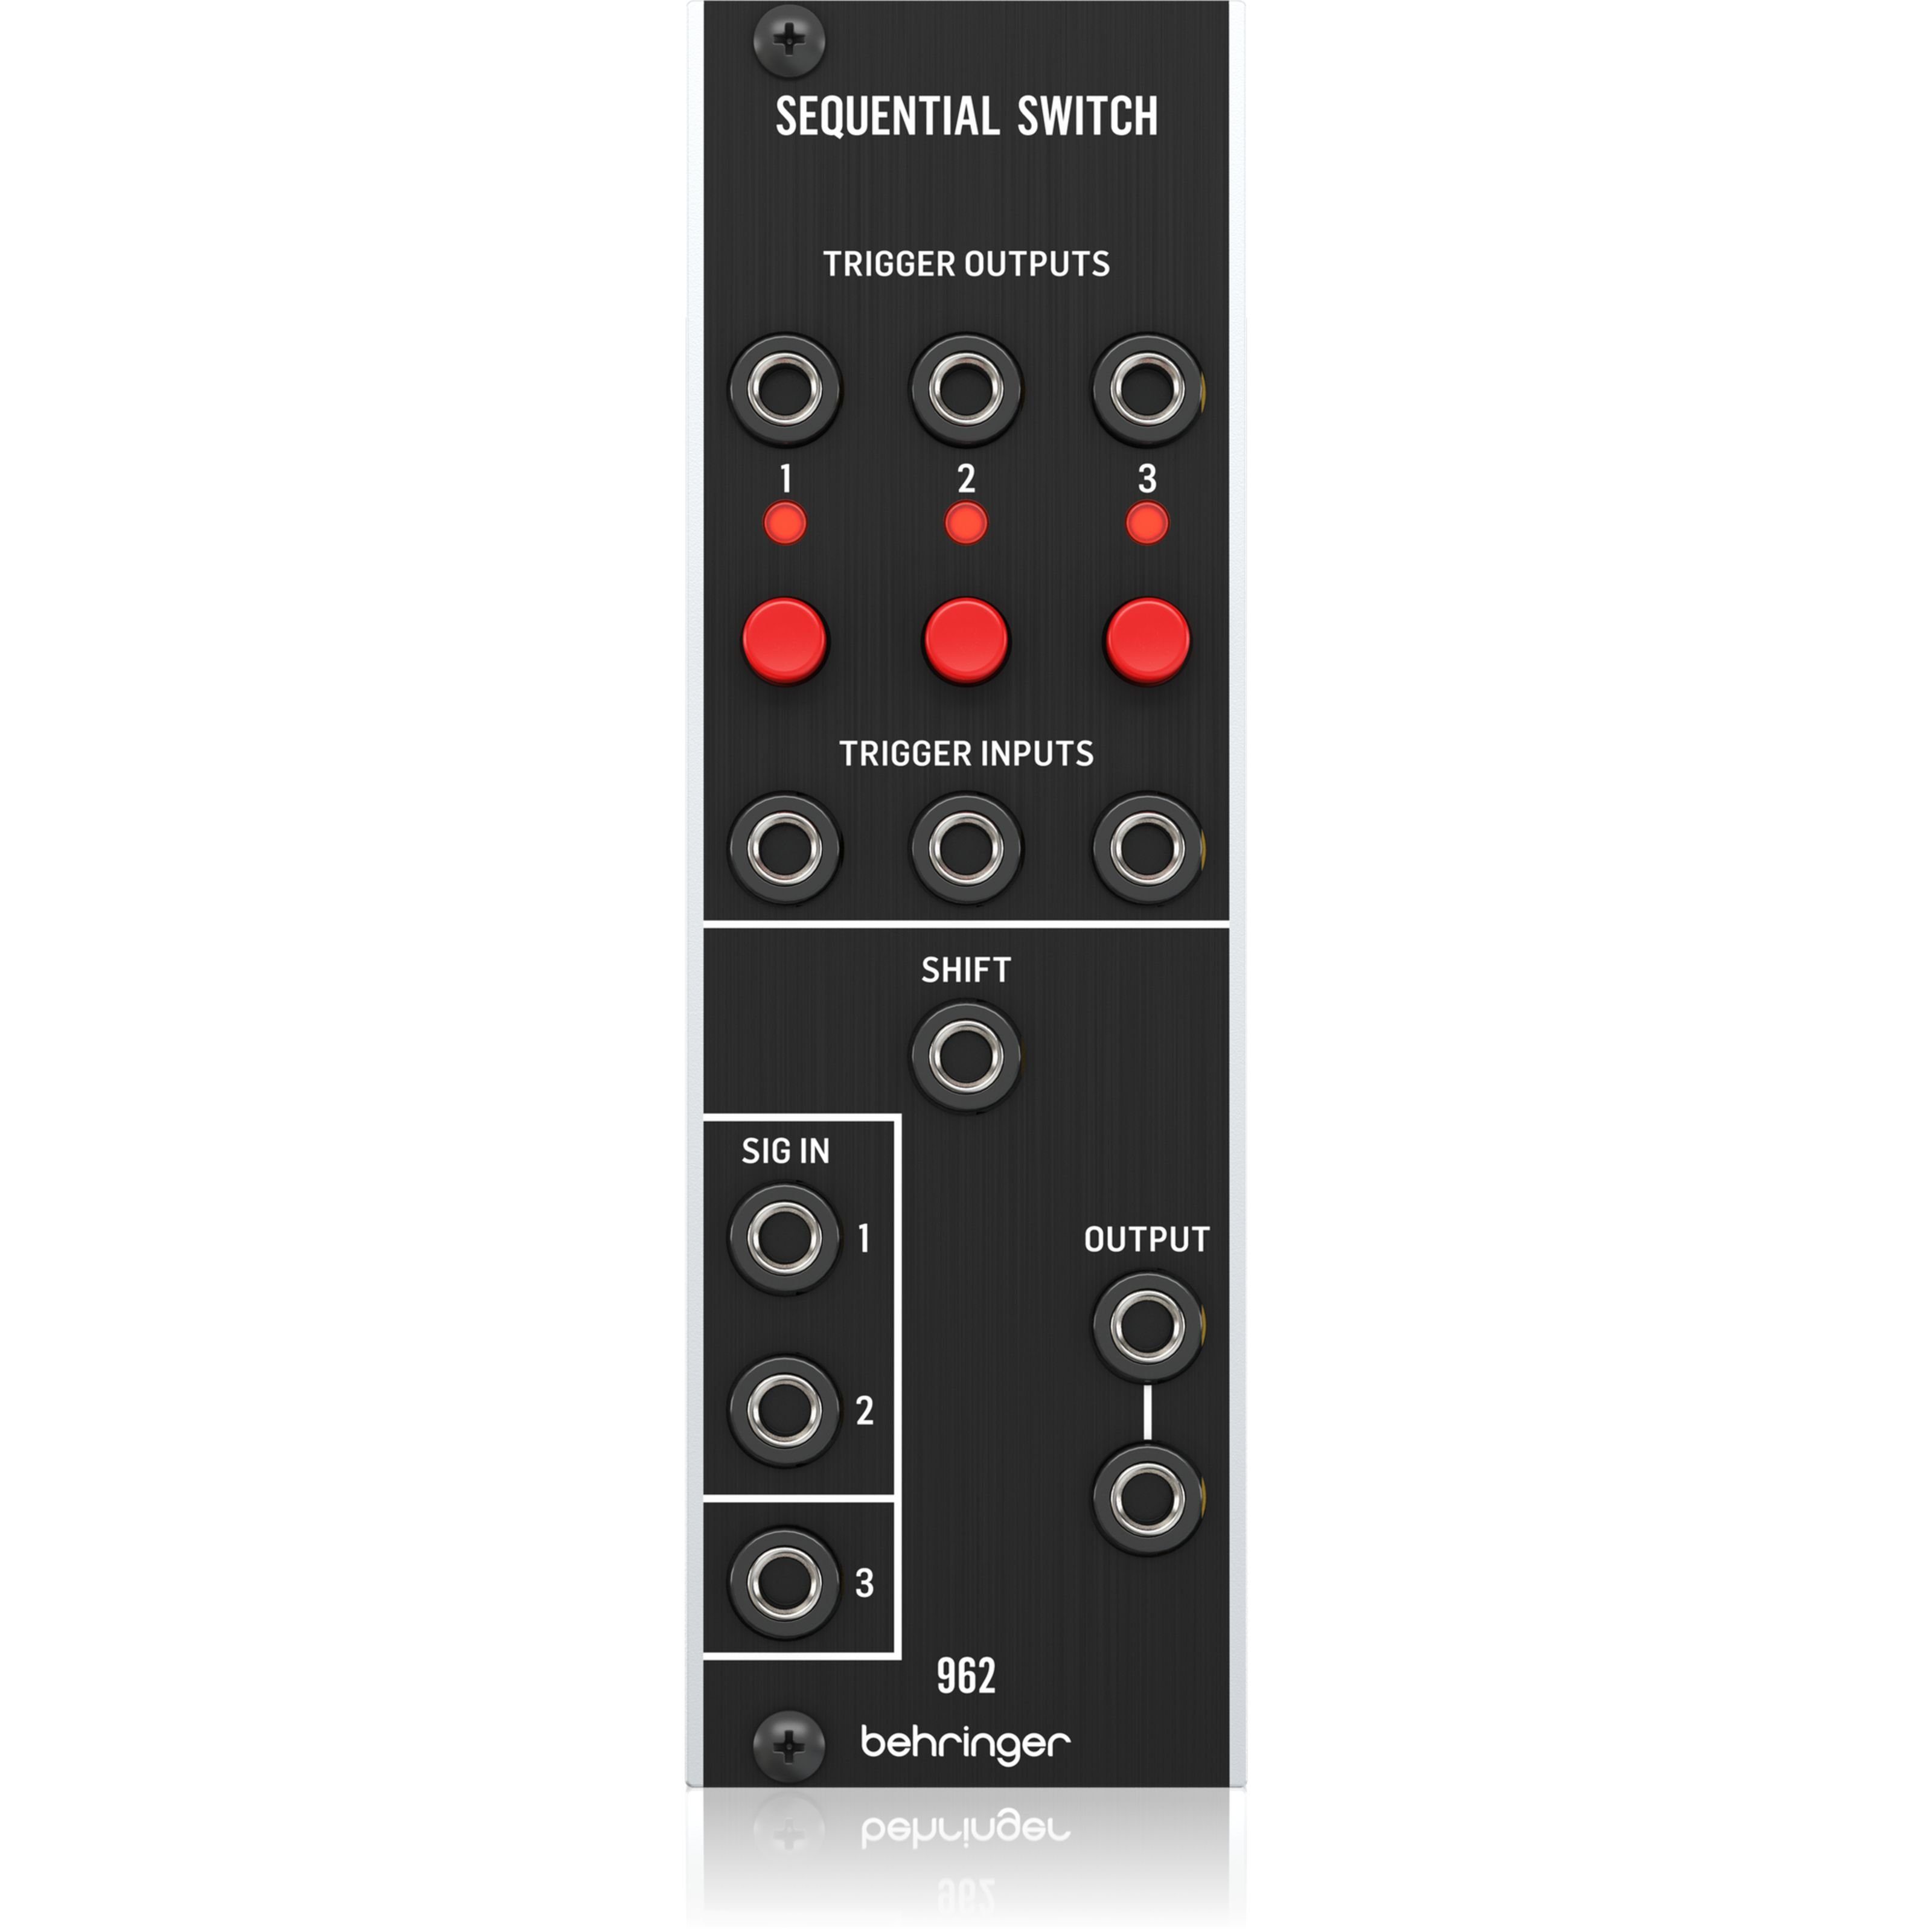 Behringer Synthesizer (962 Sequential Switch, Modular Synthesizer, Diverse Module), 962 Sequential Switch - Modular Synthesizer